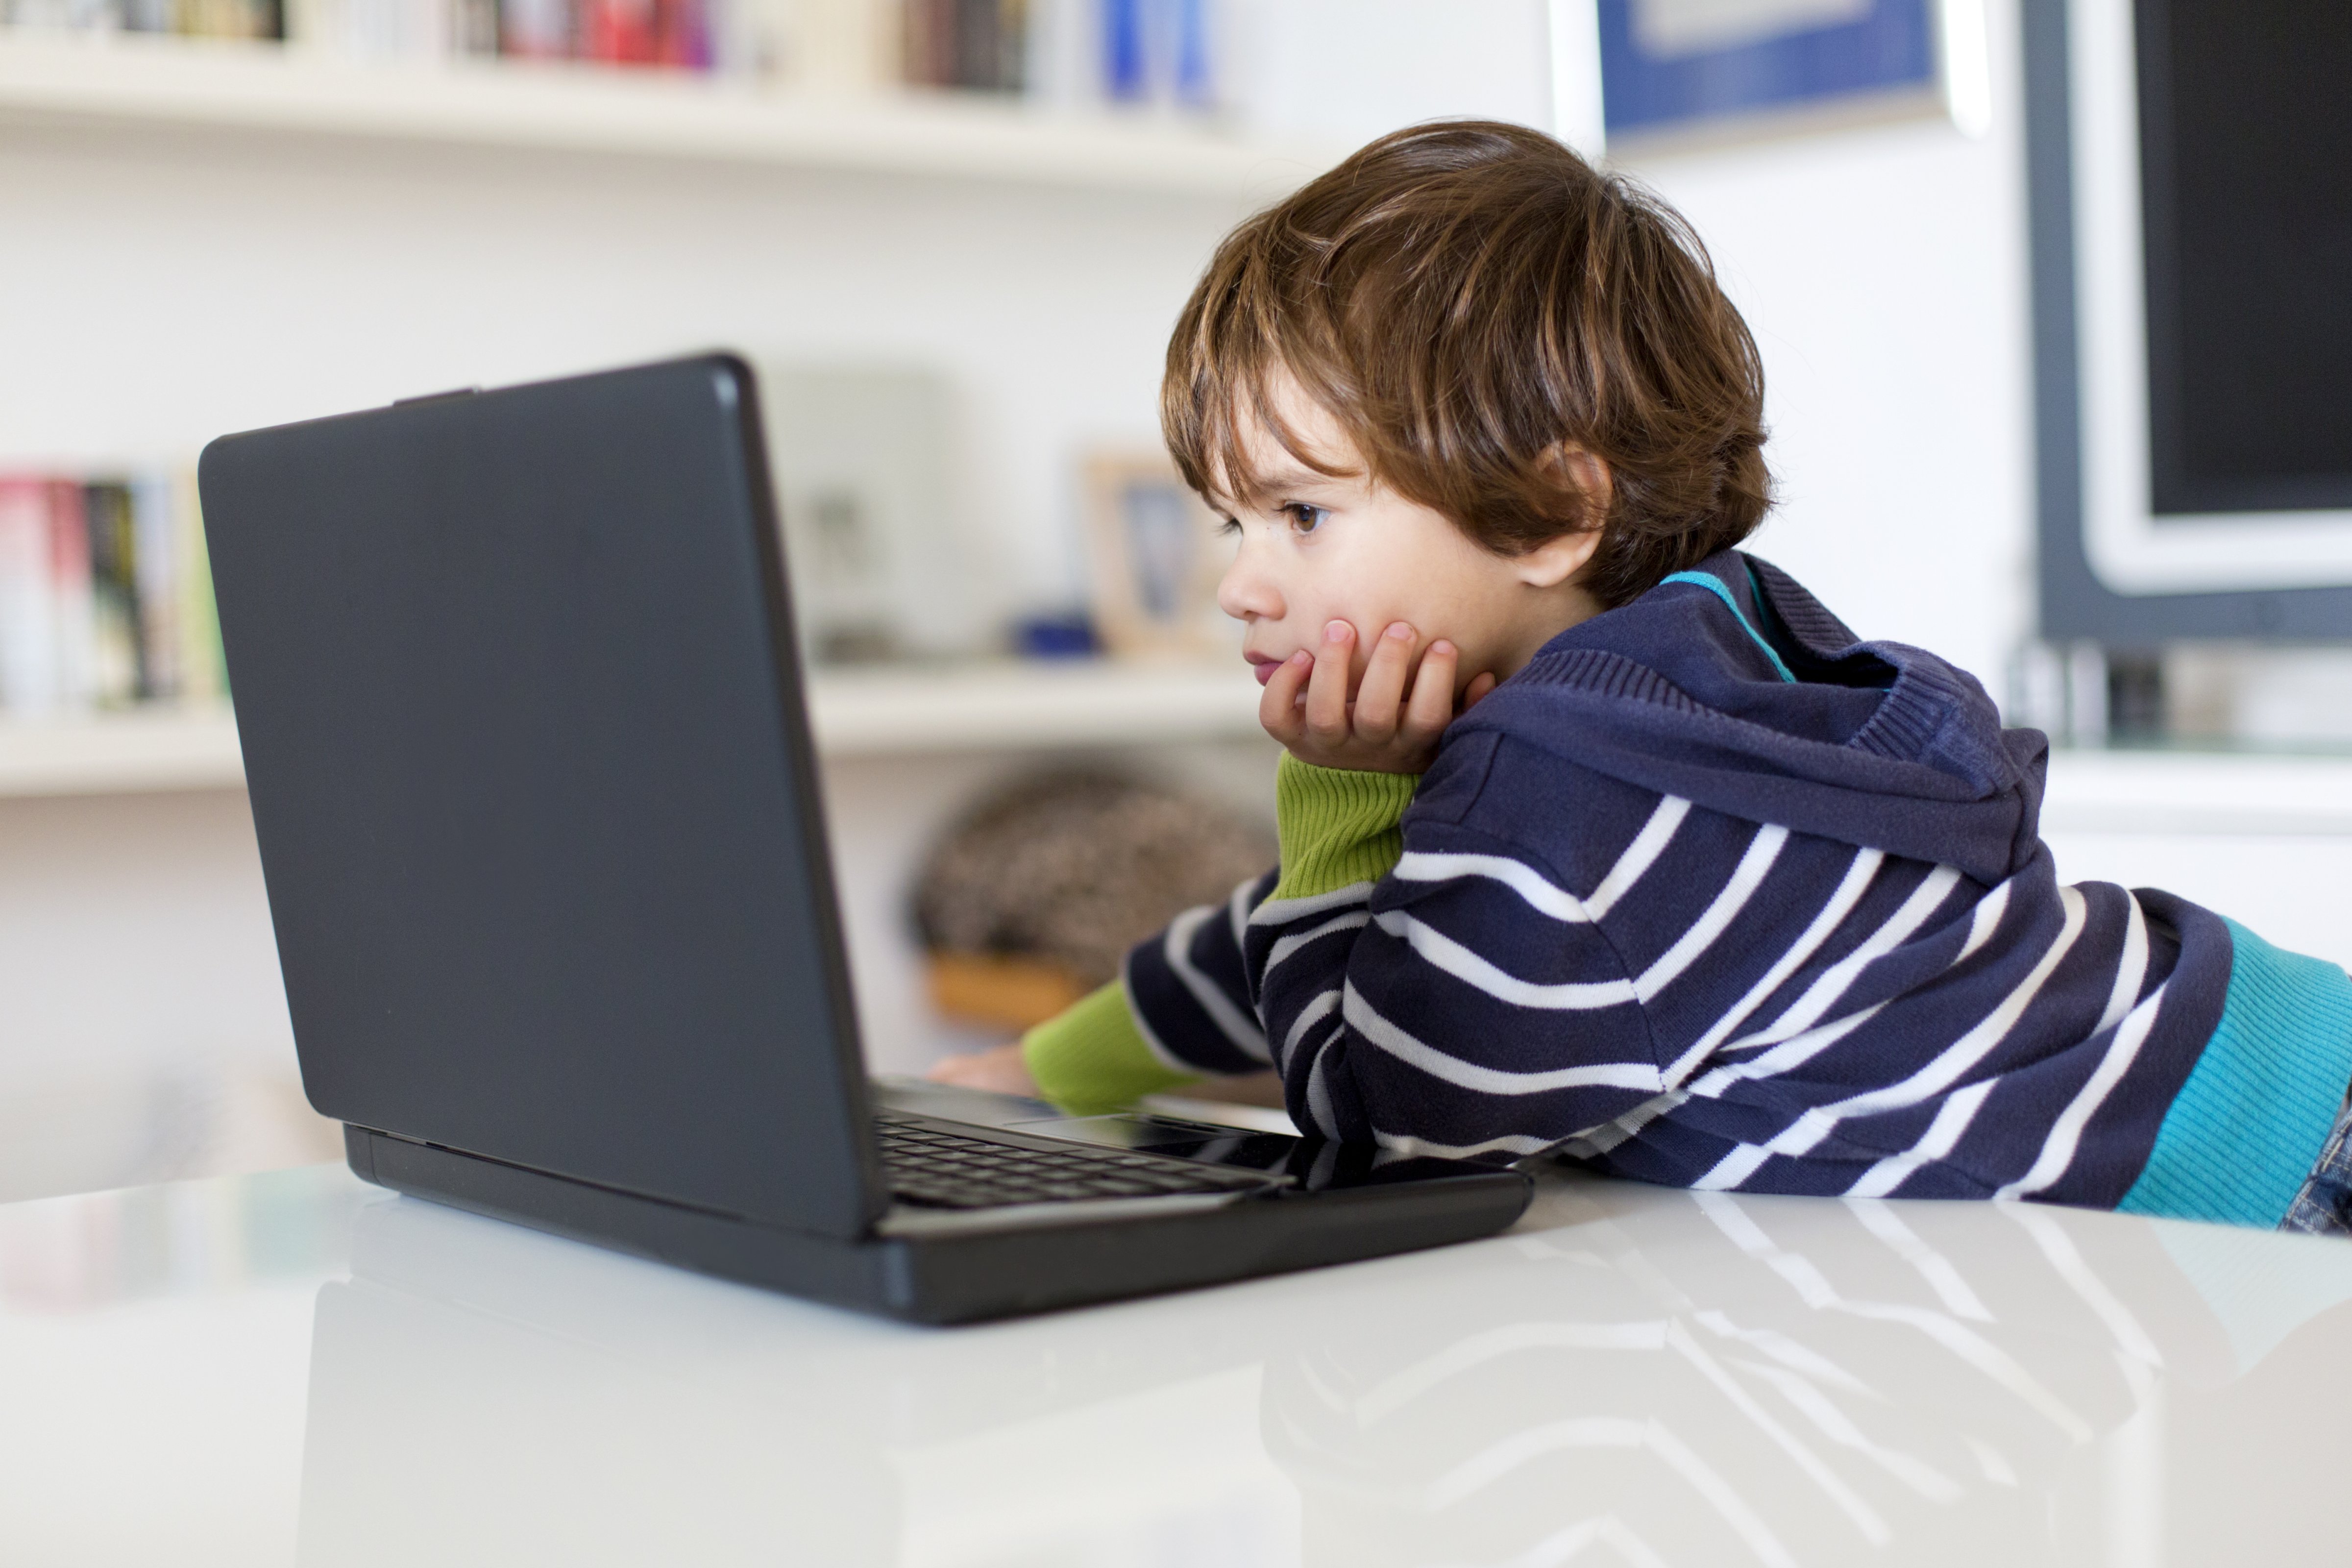 Small boy looking at laptop (Thanasis Zovoilis&mdash;Getty Images/Flickr RF)